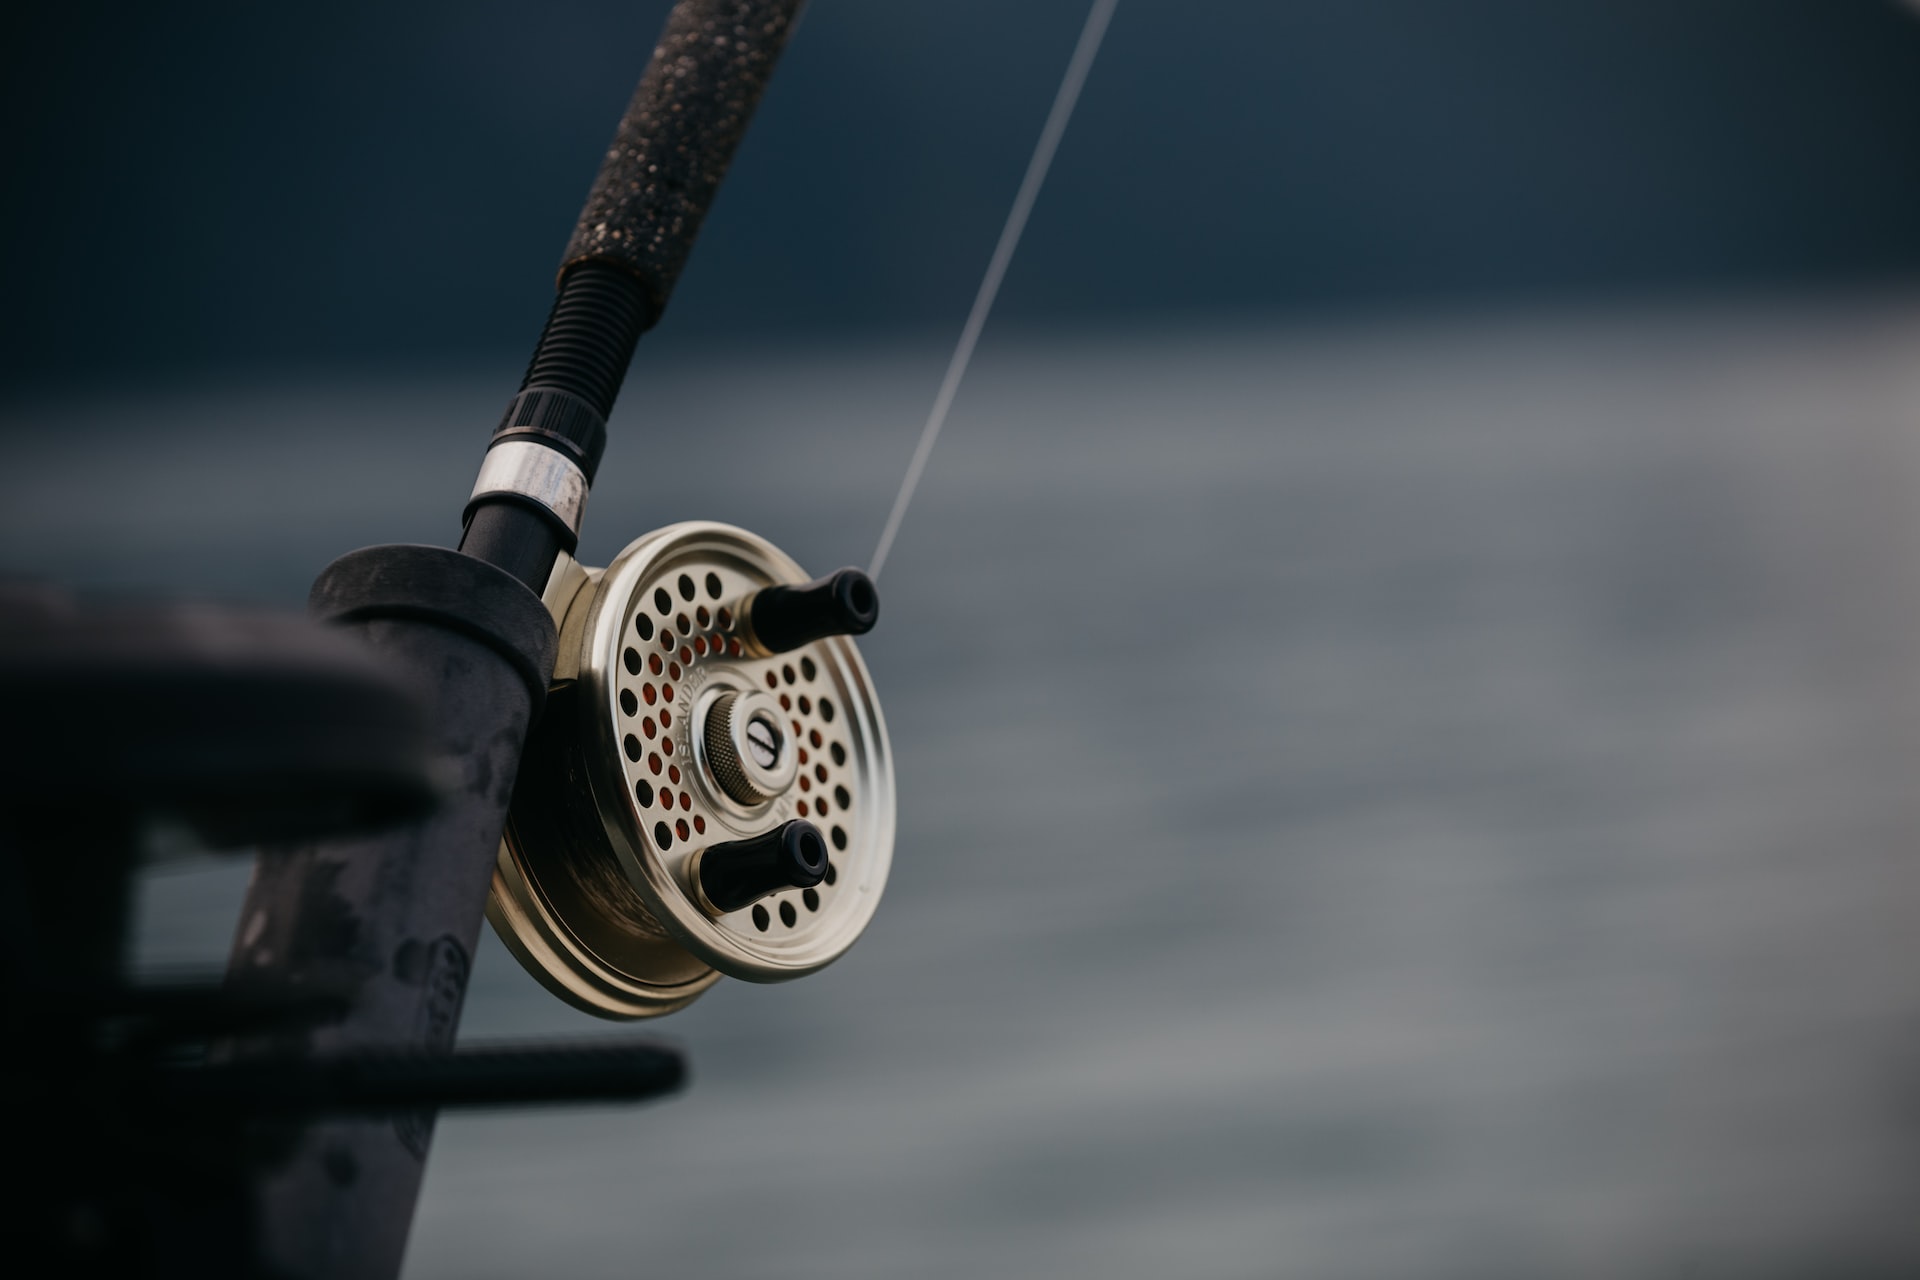 An angling rod with reel close-up